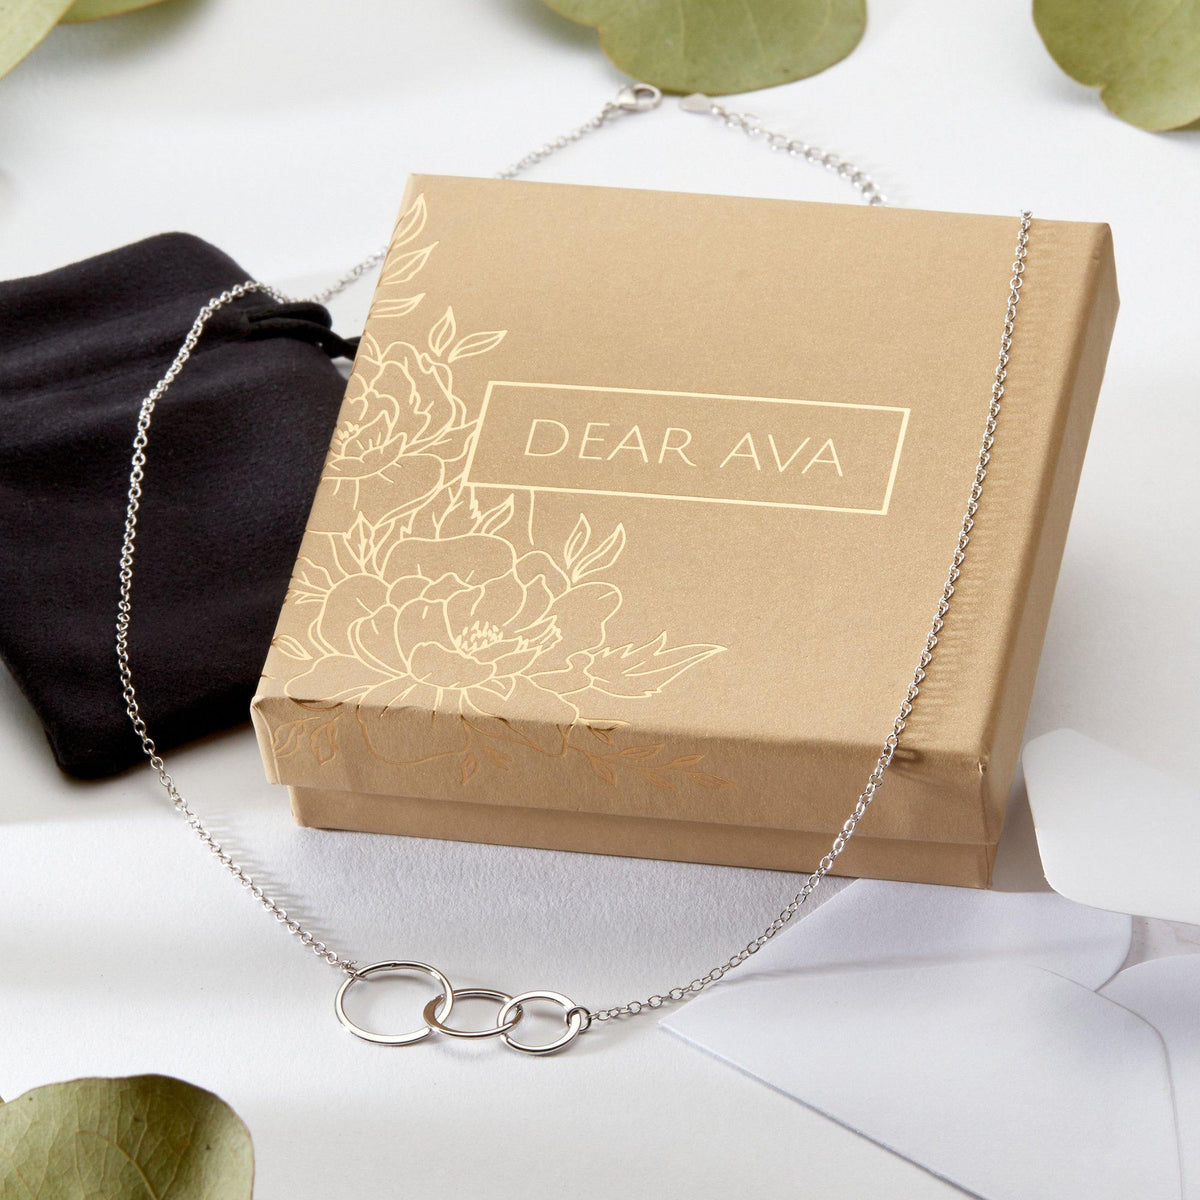 36th Birthday Necklace - Dear Ava, Jewelry / Necklaces / Pendants